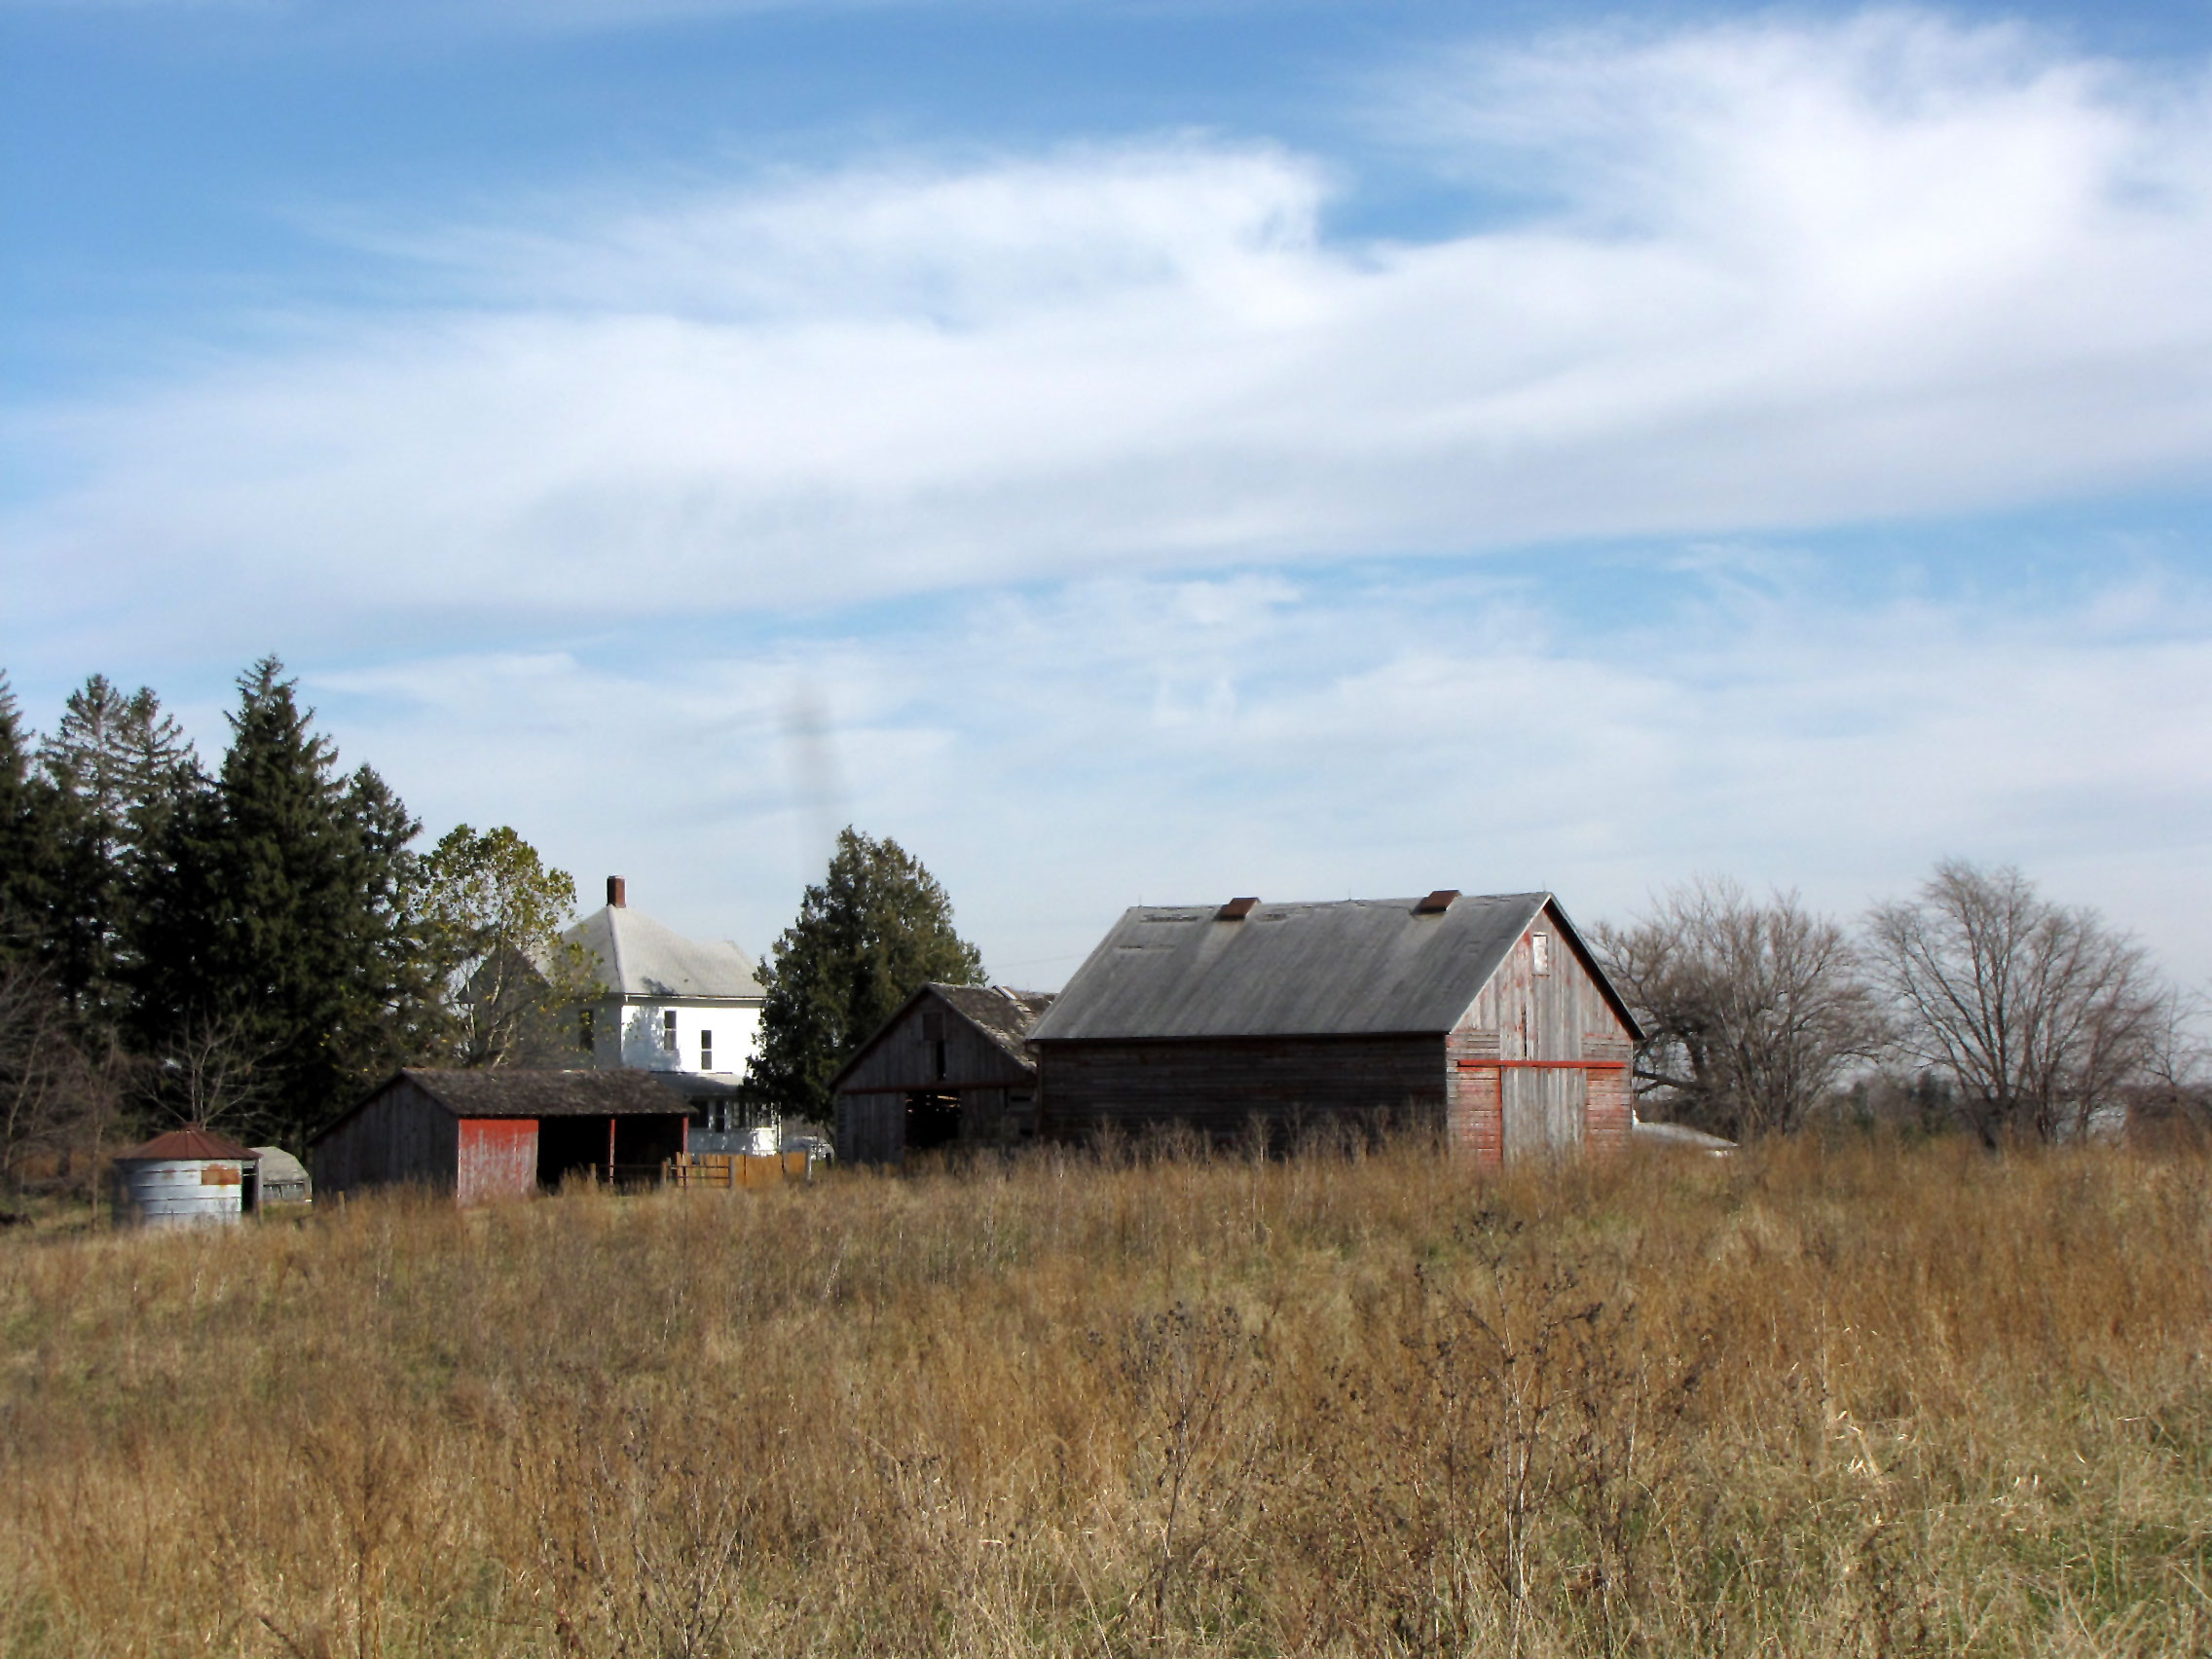 A farmstead of old buildings set in a grassland.